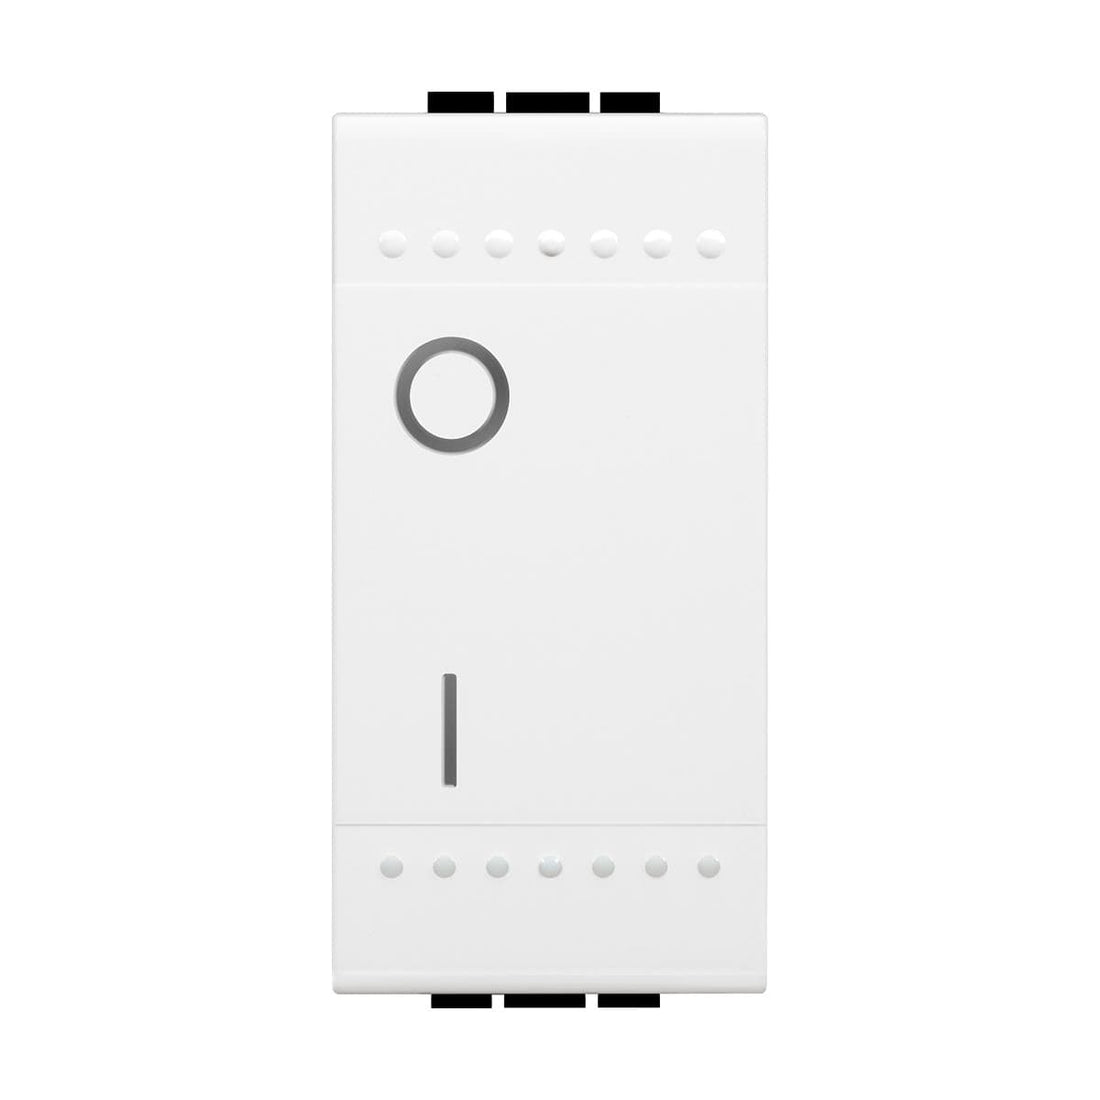 LIVING LIGHT DOUBLE POLE SWITCH 16A WHITE - best price from Maltashopper.com BR420100658